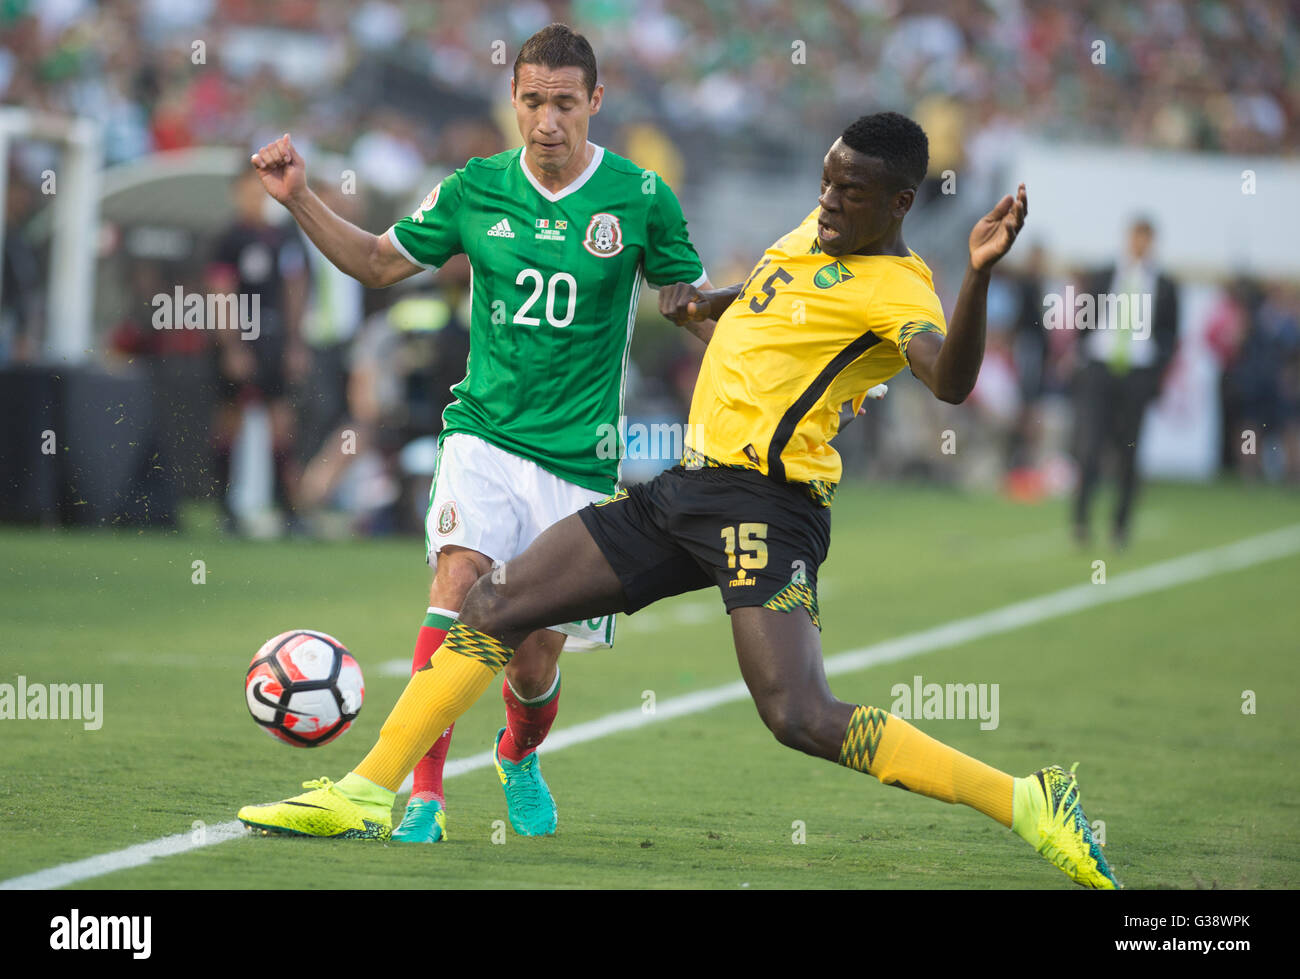 Pasadena, USA. 9th June, 2016. Mexico's Jesus Duenas (L) vies with Jamaica's Je-Vanghn Watson during the Copa America Centenario tournament Group C football match in Pasadena, California, the United States, on June 9, 2016. Credit:  Yang Lei/Xinhua/Alamy Live News Stock Photo